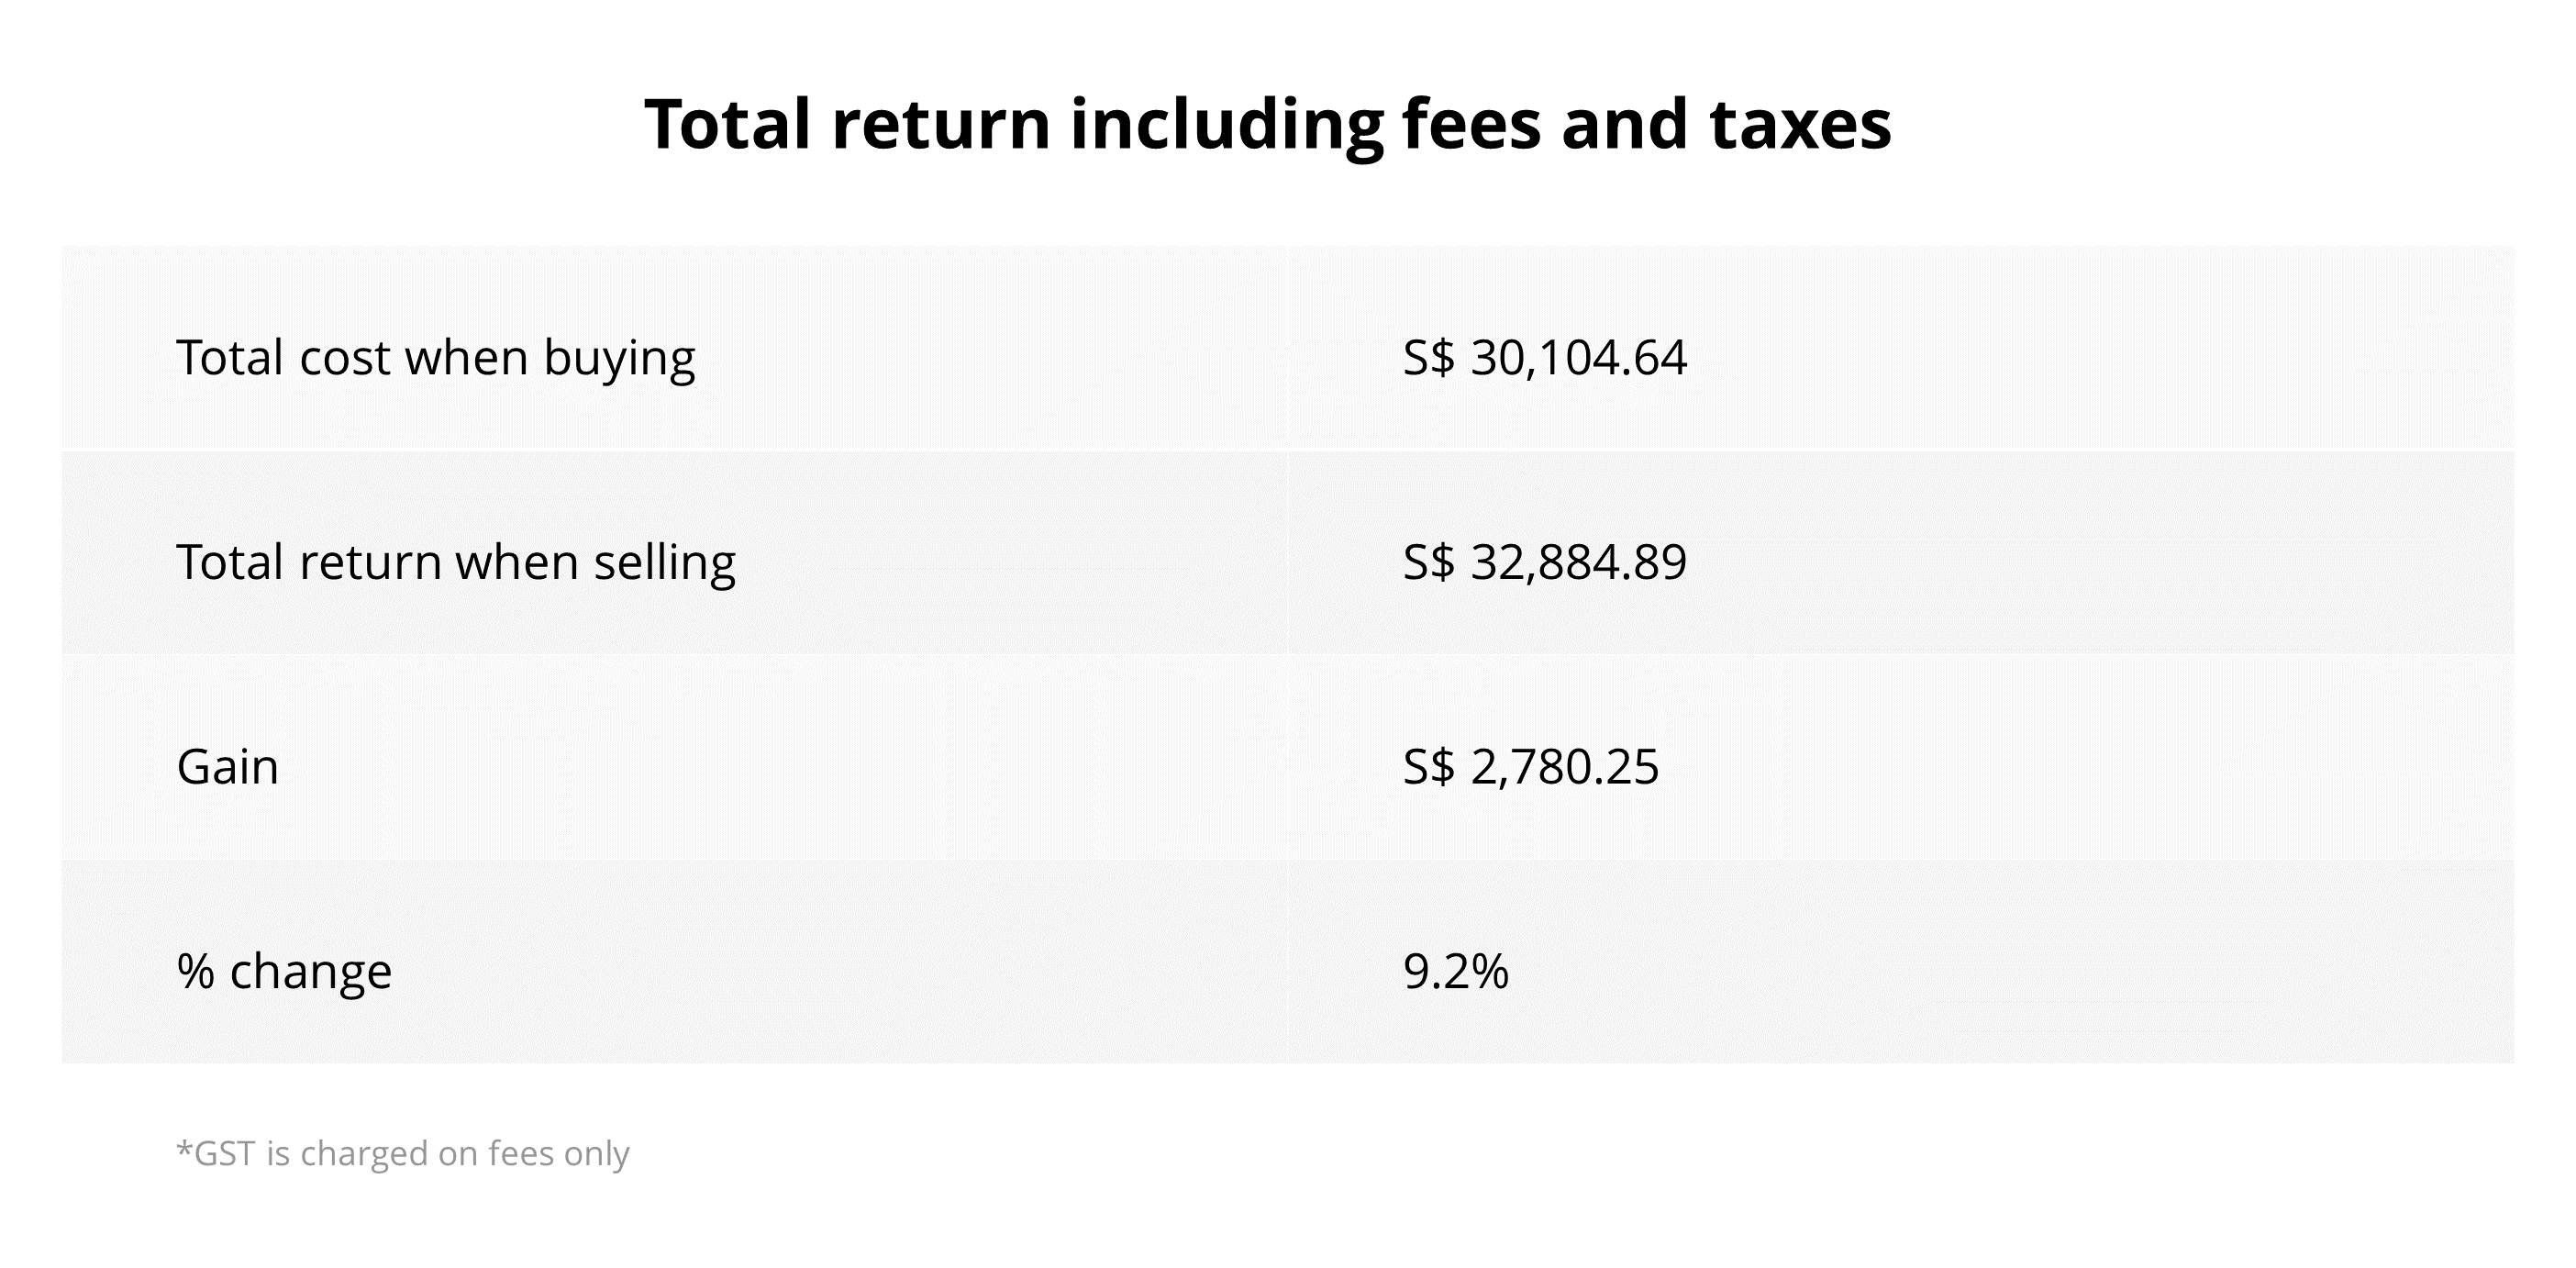 Investment fees for equities in Singapore